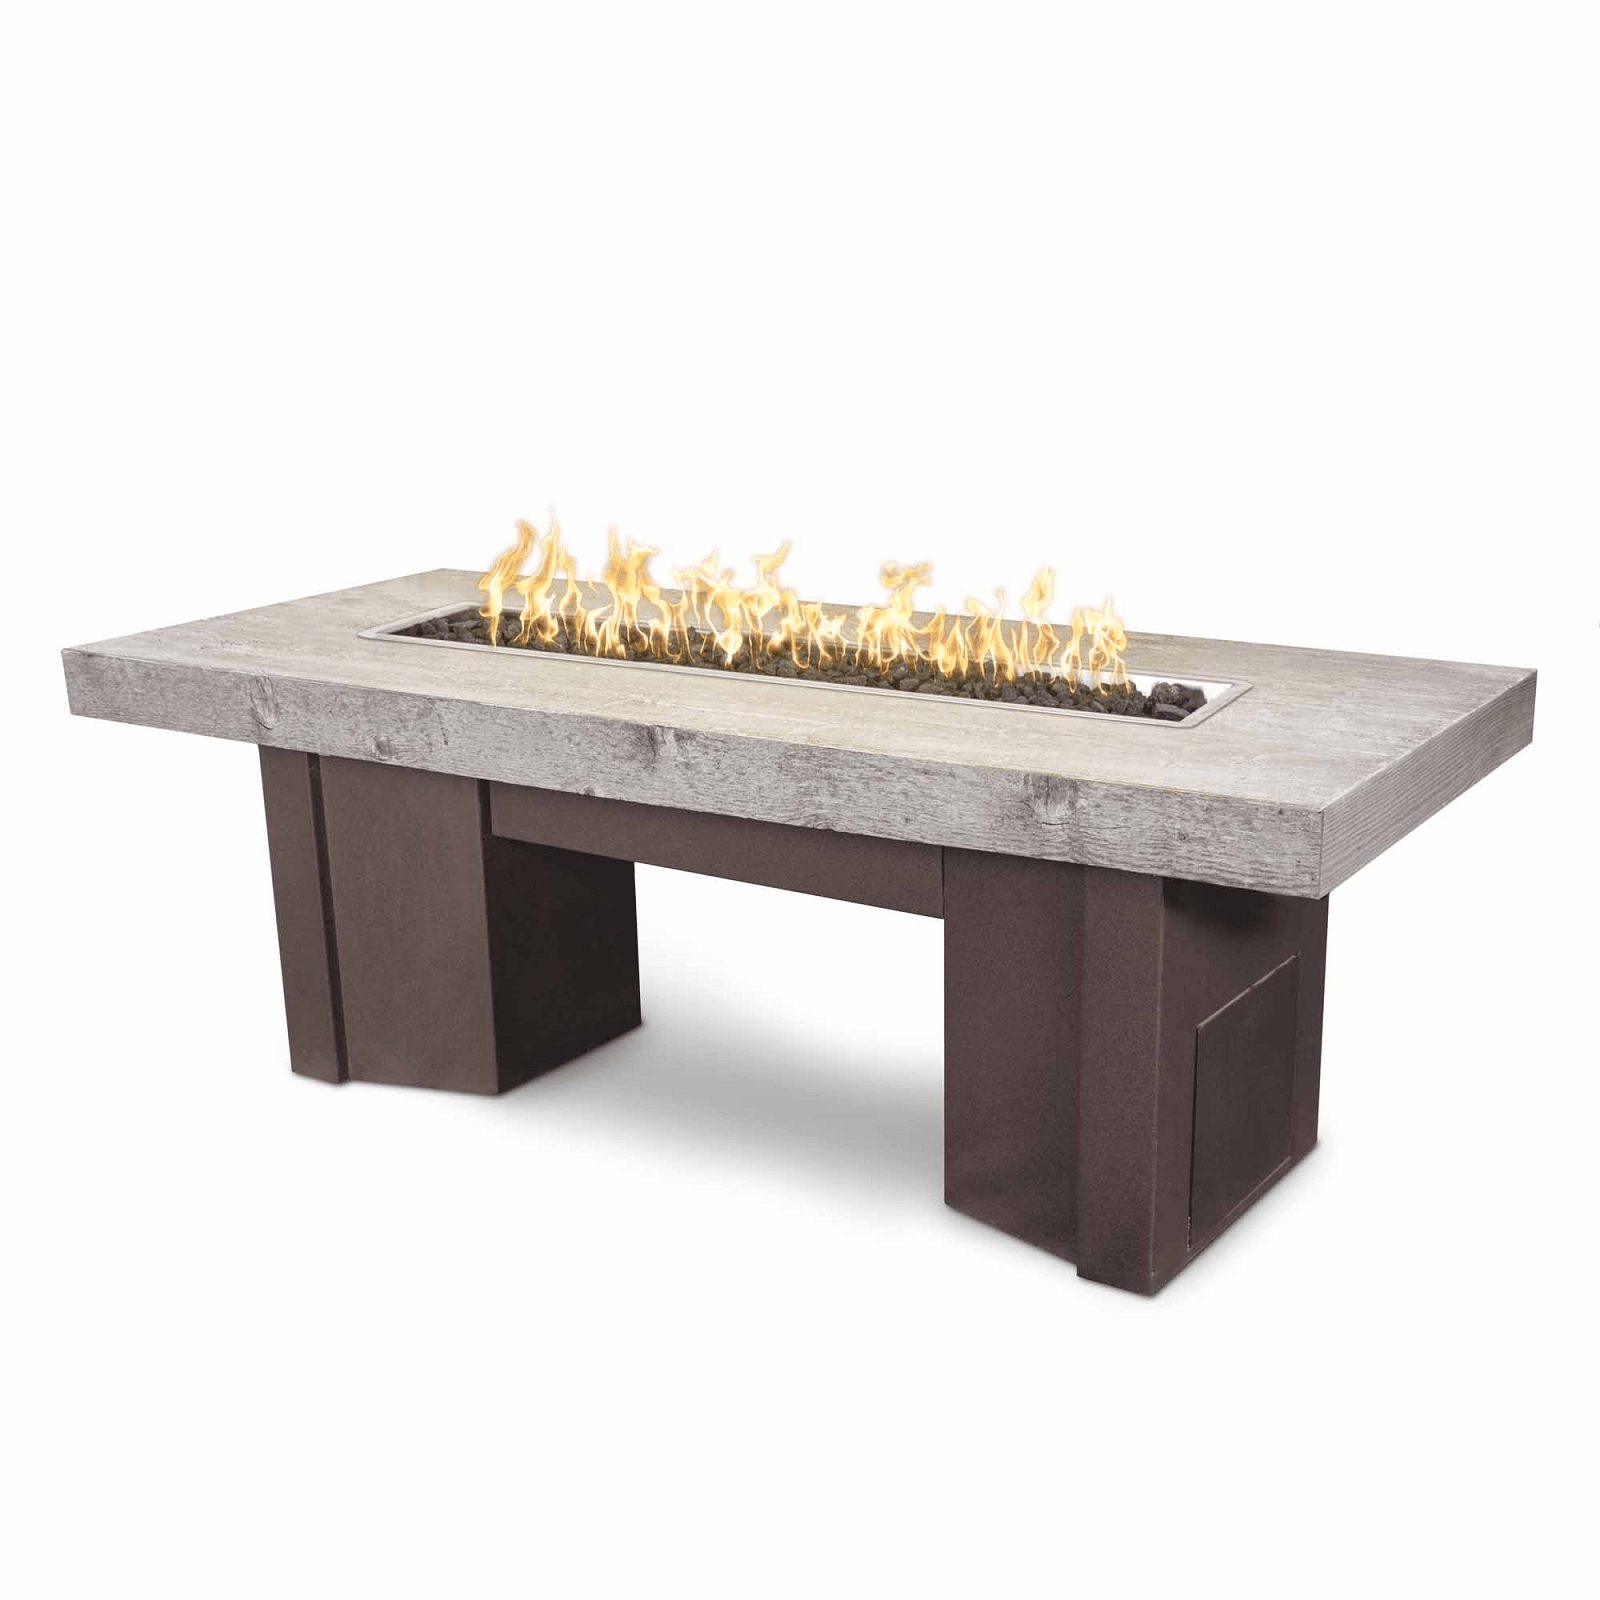 The Outdoor Plus Fire Features The Outdoor Plus 78" Alameda Fire Table Wood Grain - 110V Plug & Play Electronic Ignition / OPT-ALMWG78EKIT